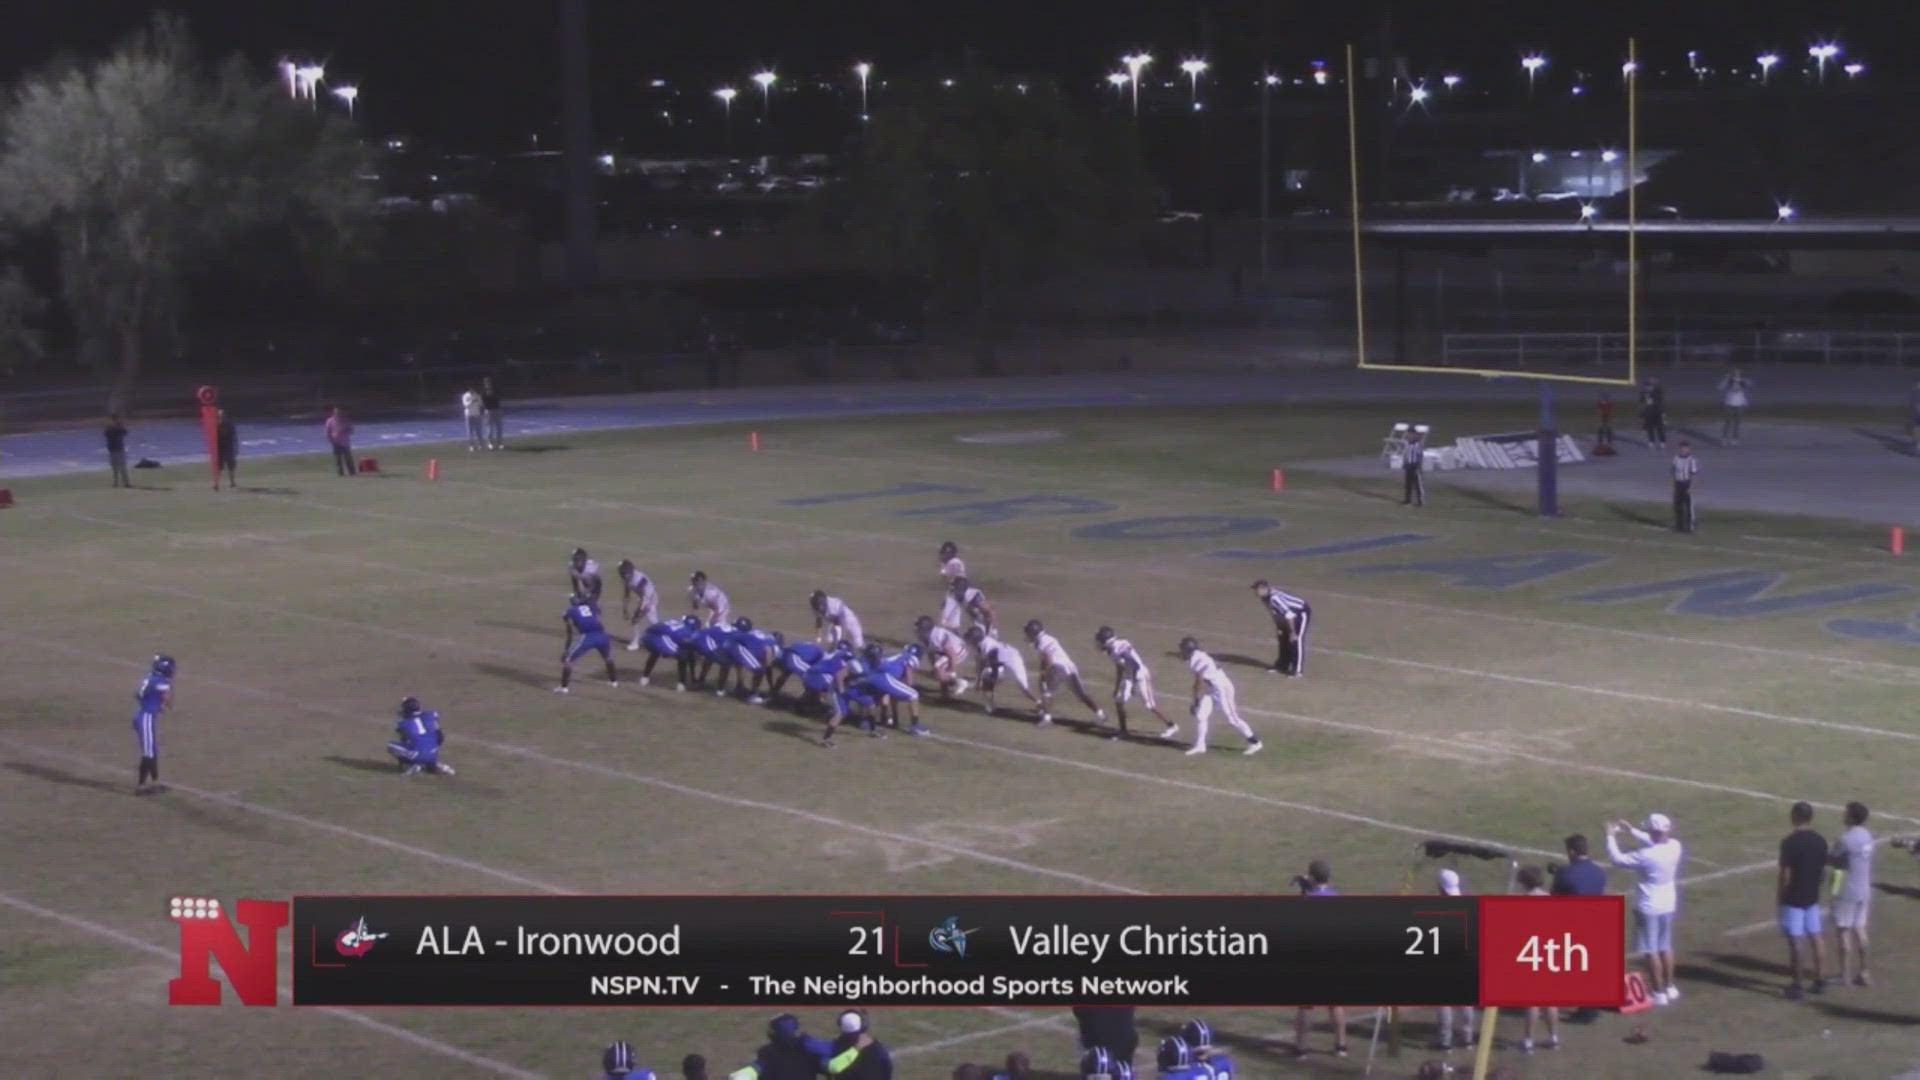 #2 Valley Christian avoided a very early playoff exit by kicking a field goal in the final minute to beat #15 ALA-Ironwood, 24-21